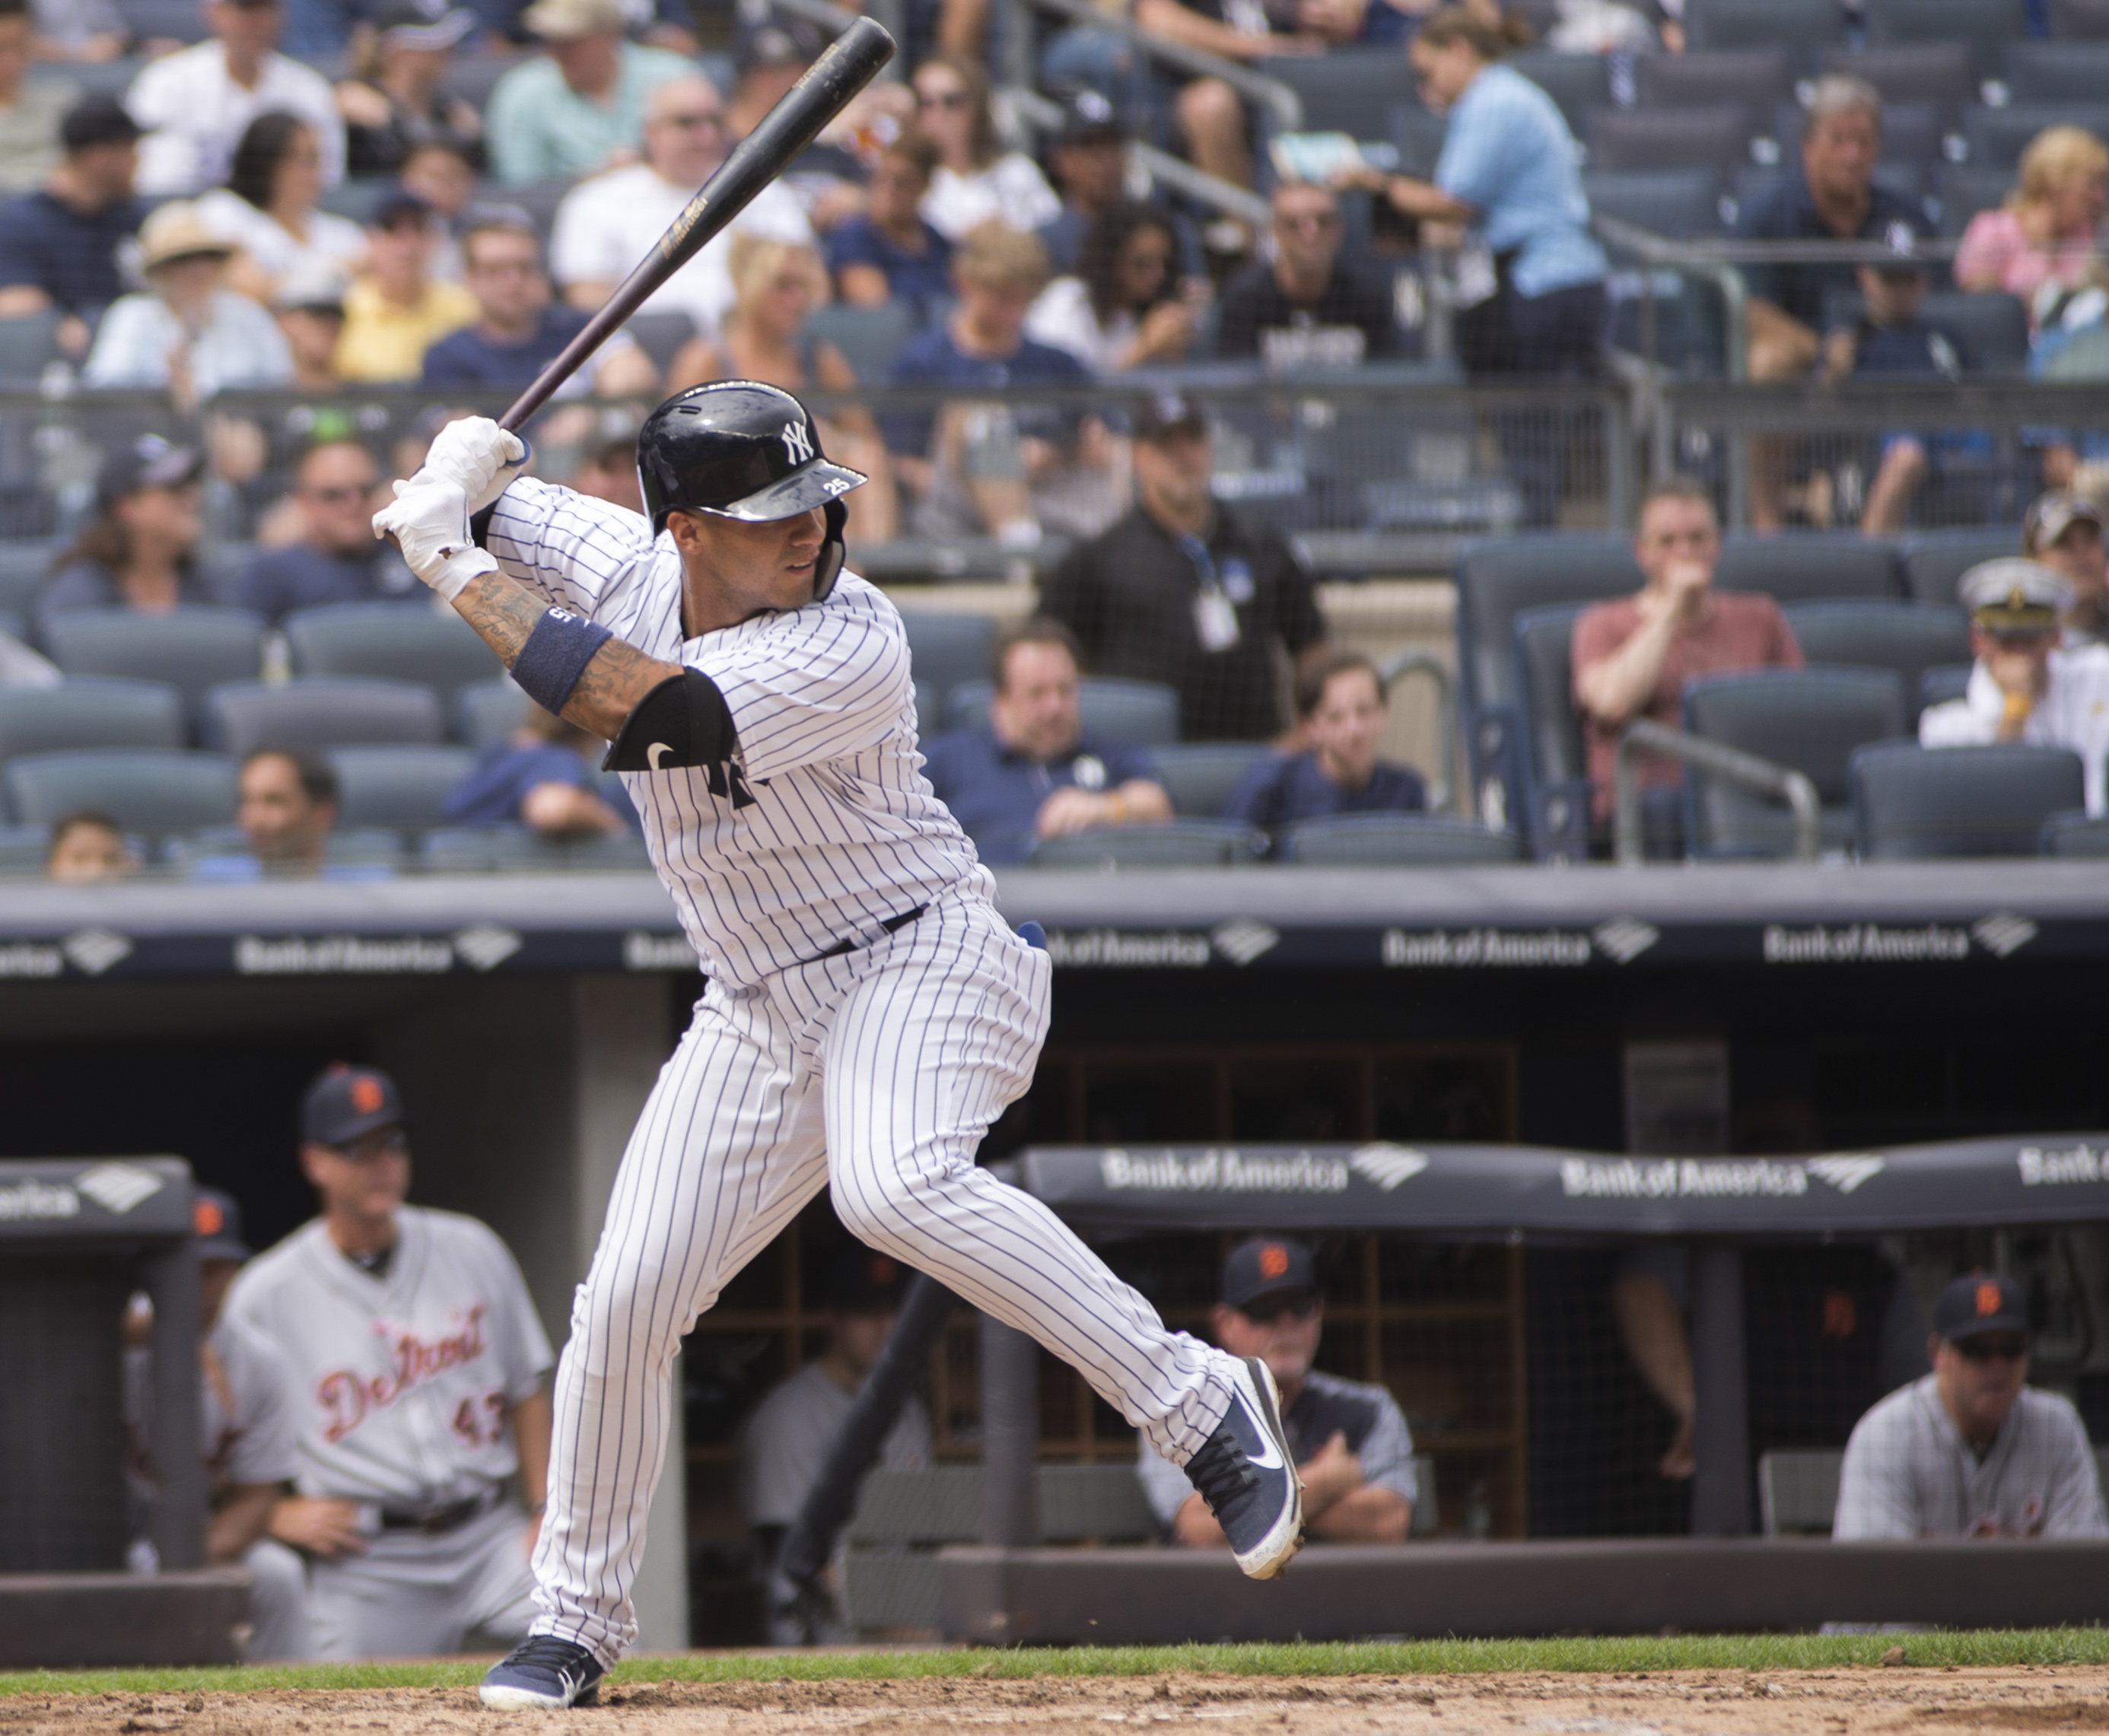 Gleyber Torres prepares for important first full year at shortstop, by  Steve Angelovich